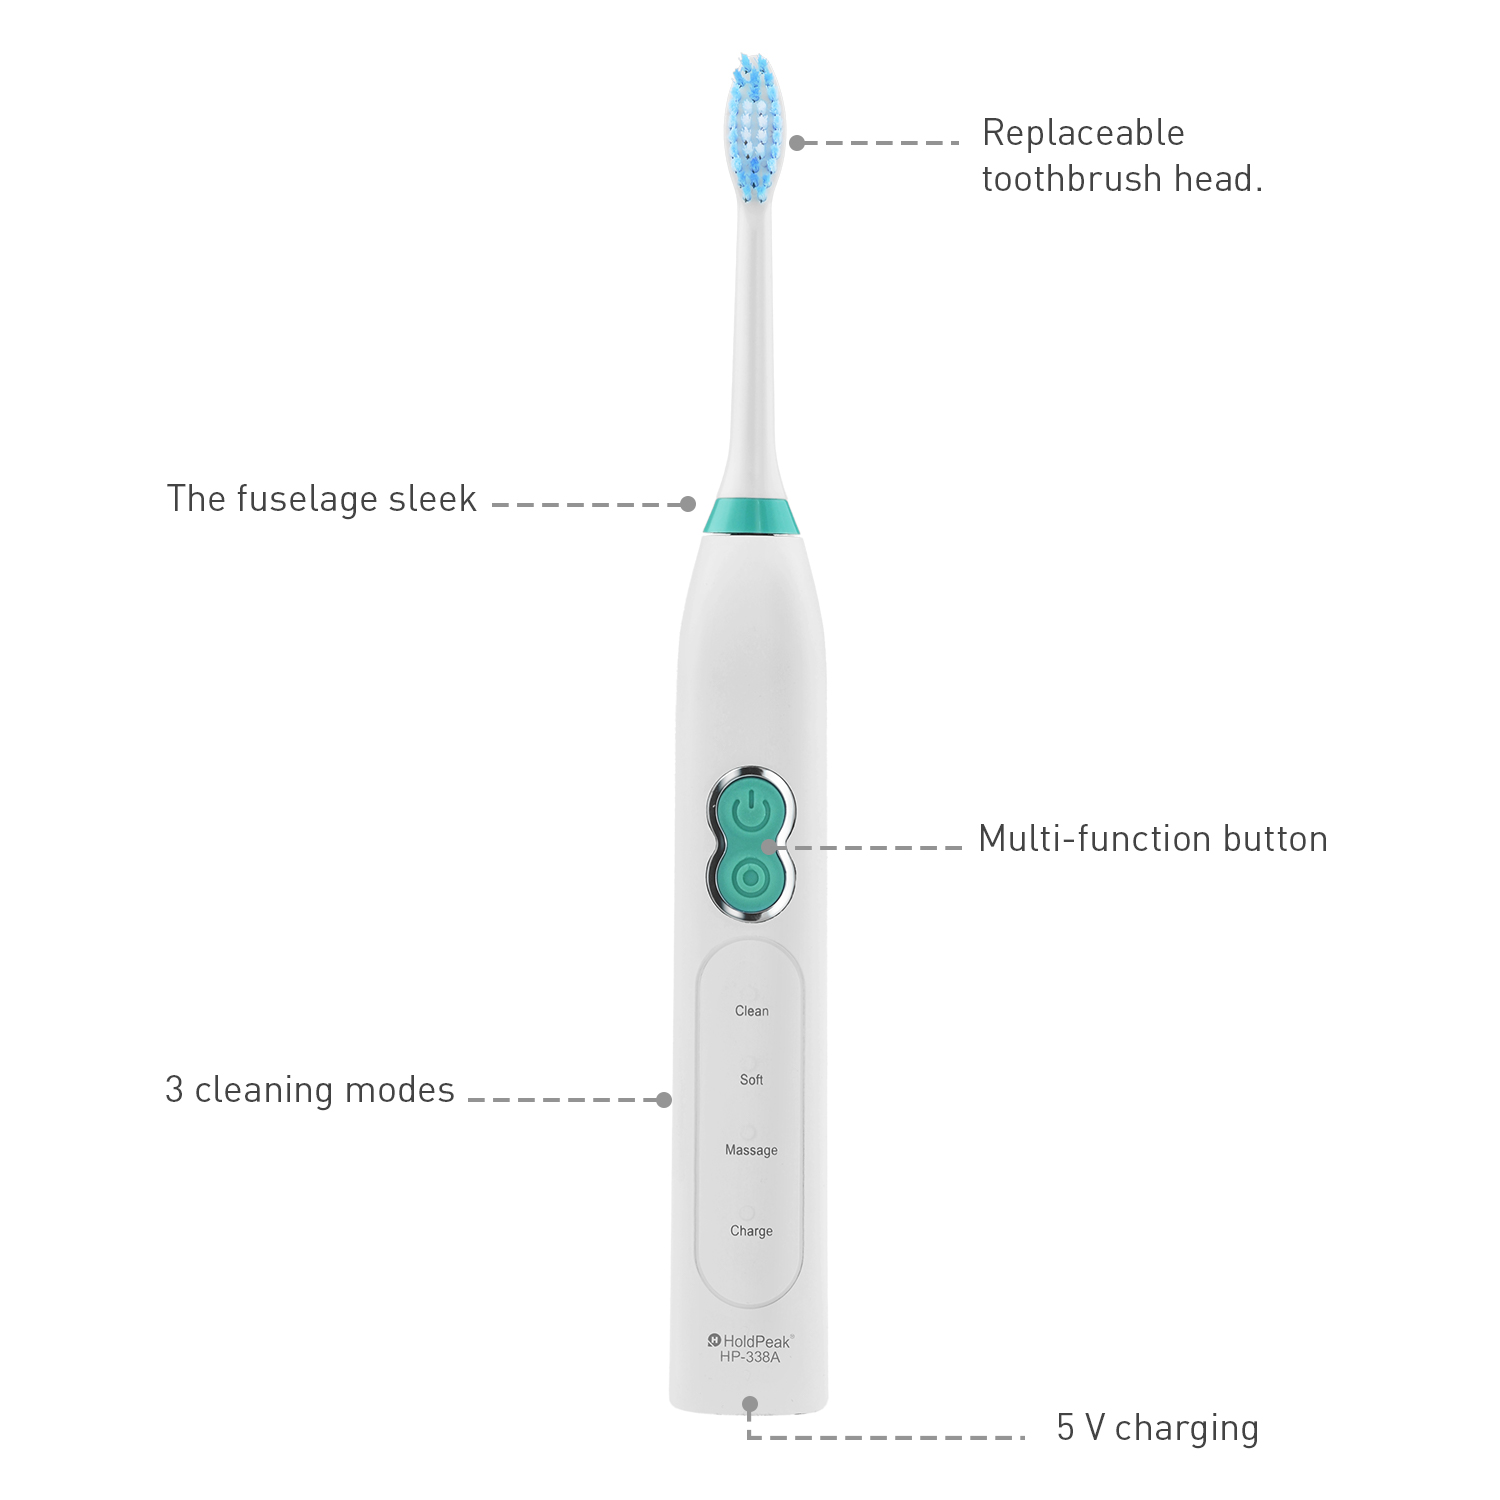 HoldPeak high-quality cheapest braun electric toothbrush factory for cleaning